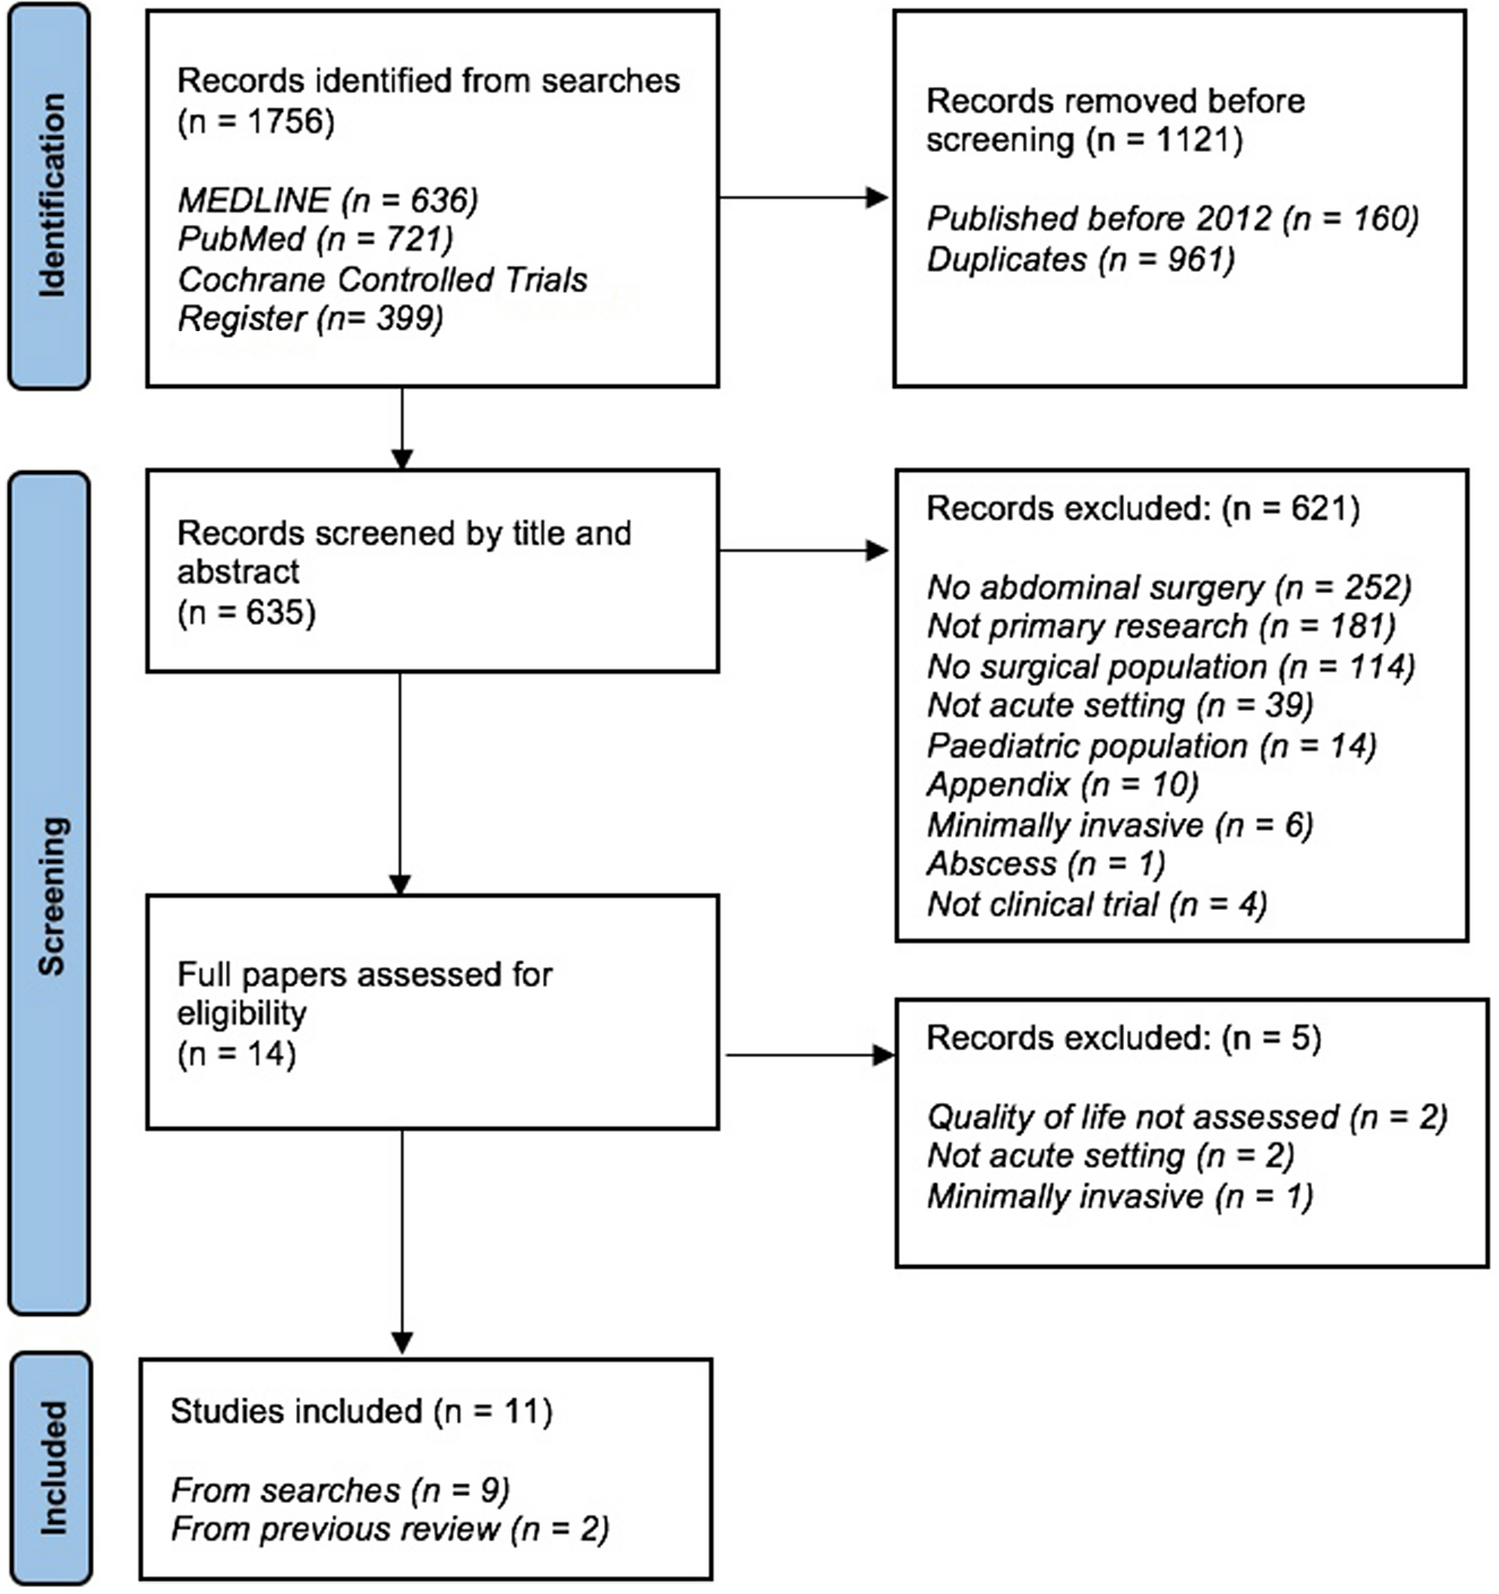 Reporting of health-related quality of life in emergency laparotomy trials: a systematic review and narrative synthesis